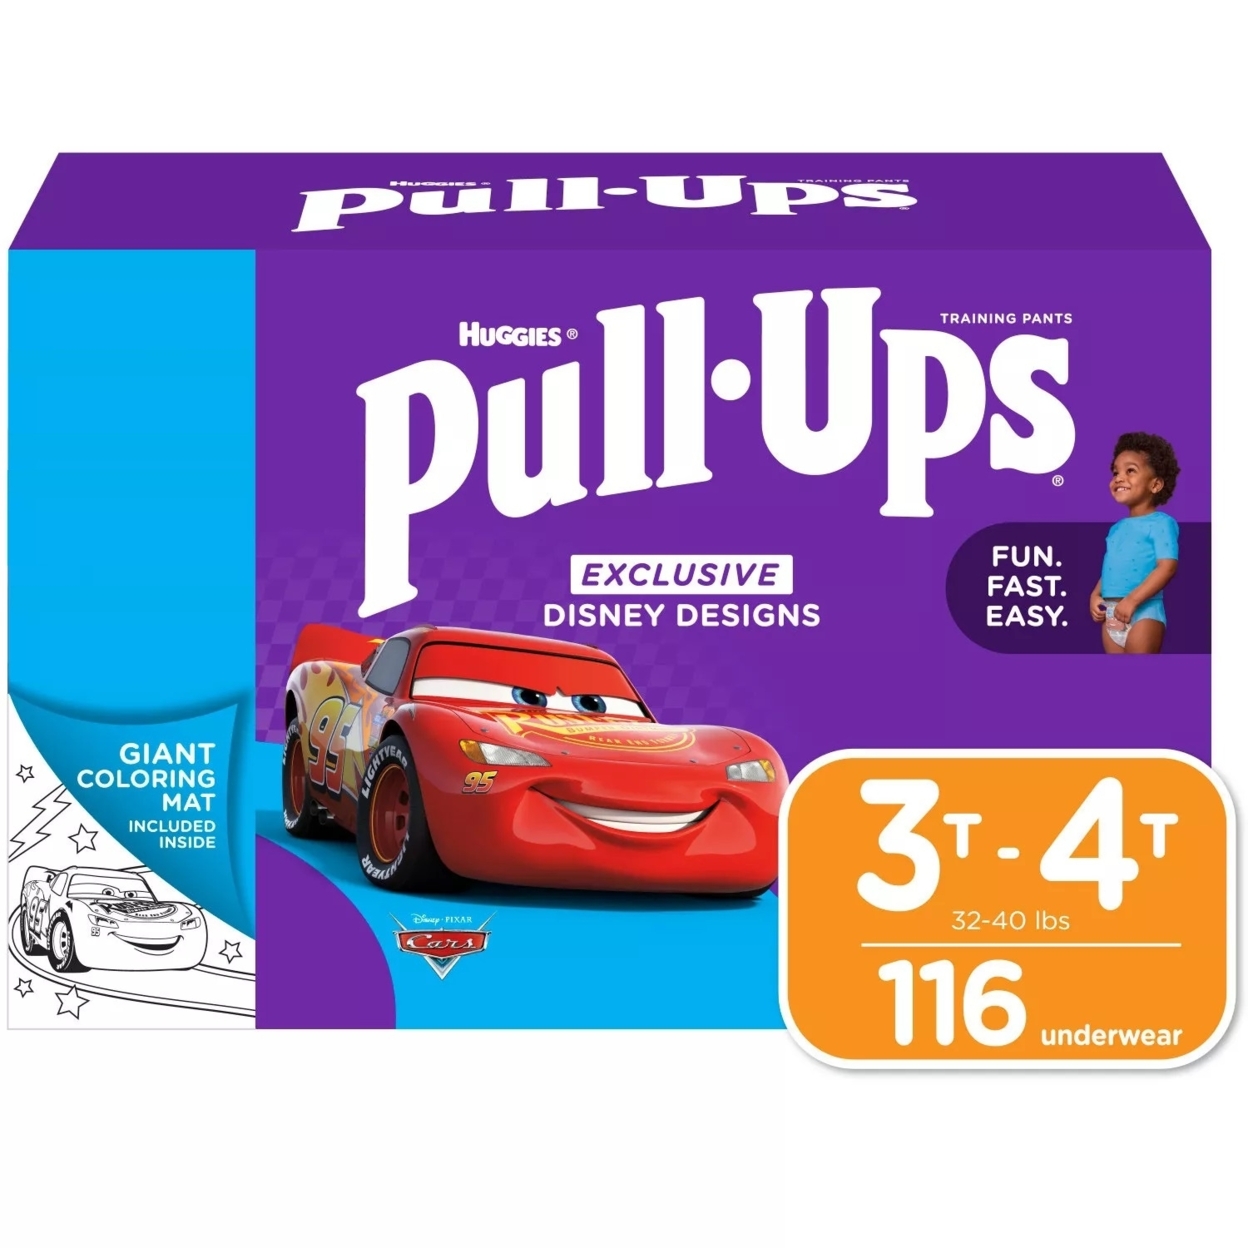 Huggies Pull-Ups Training Pants For Boys, 3T-4T 32-40 Pounds (116 Count)